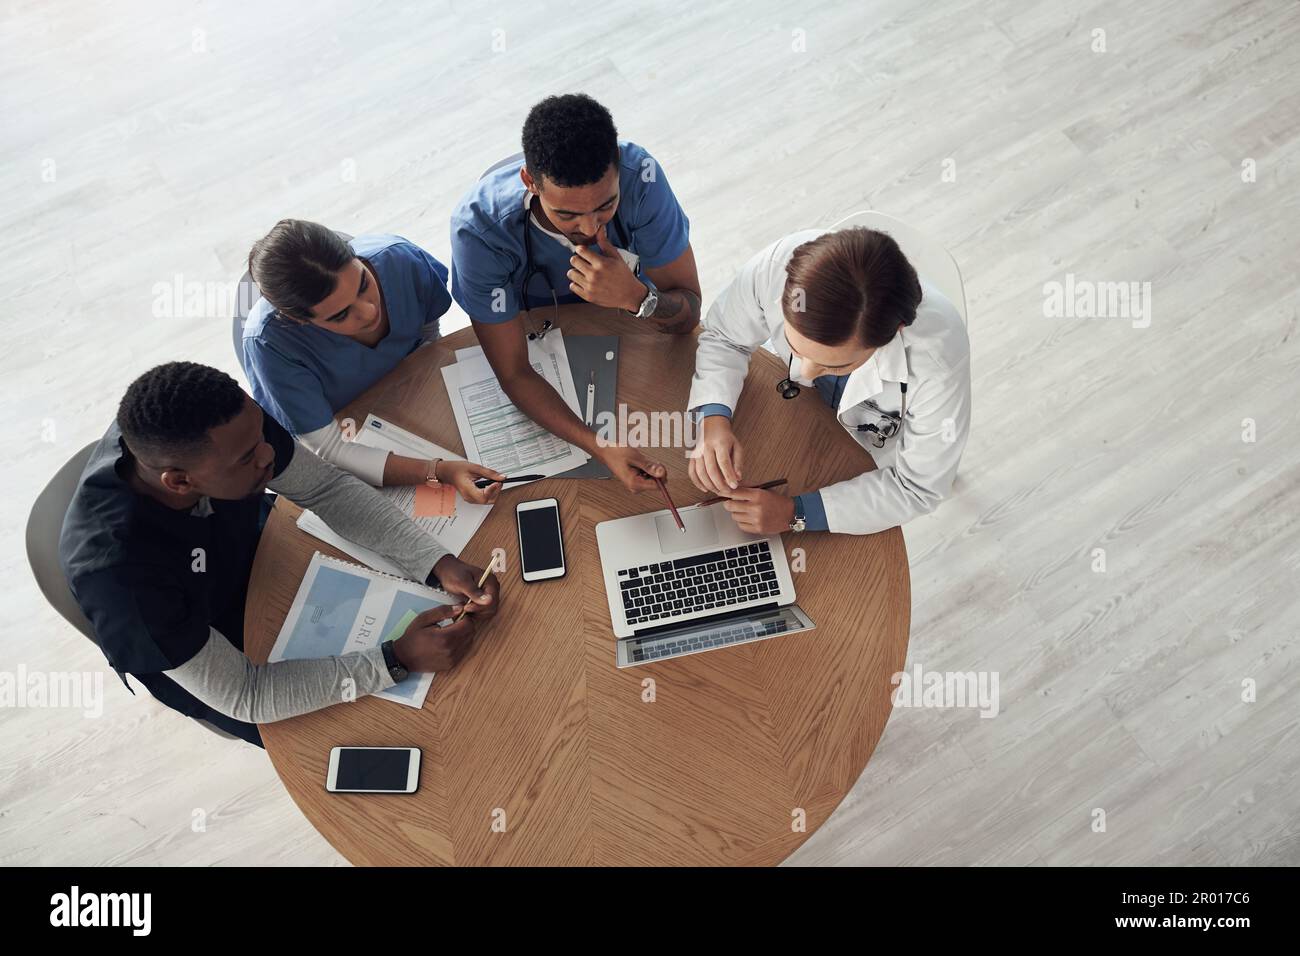 Together we will overcome. Shot a group of doctors discussing work matters in the office at work. Stock Photo